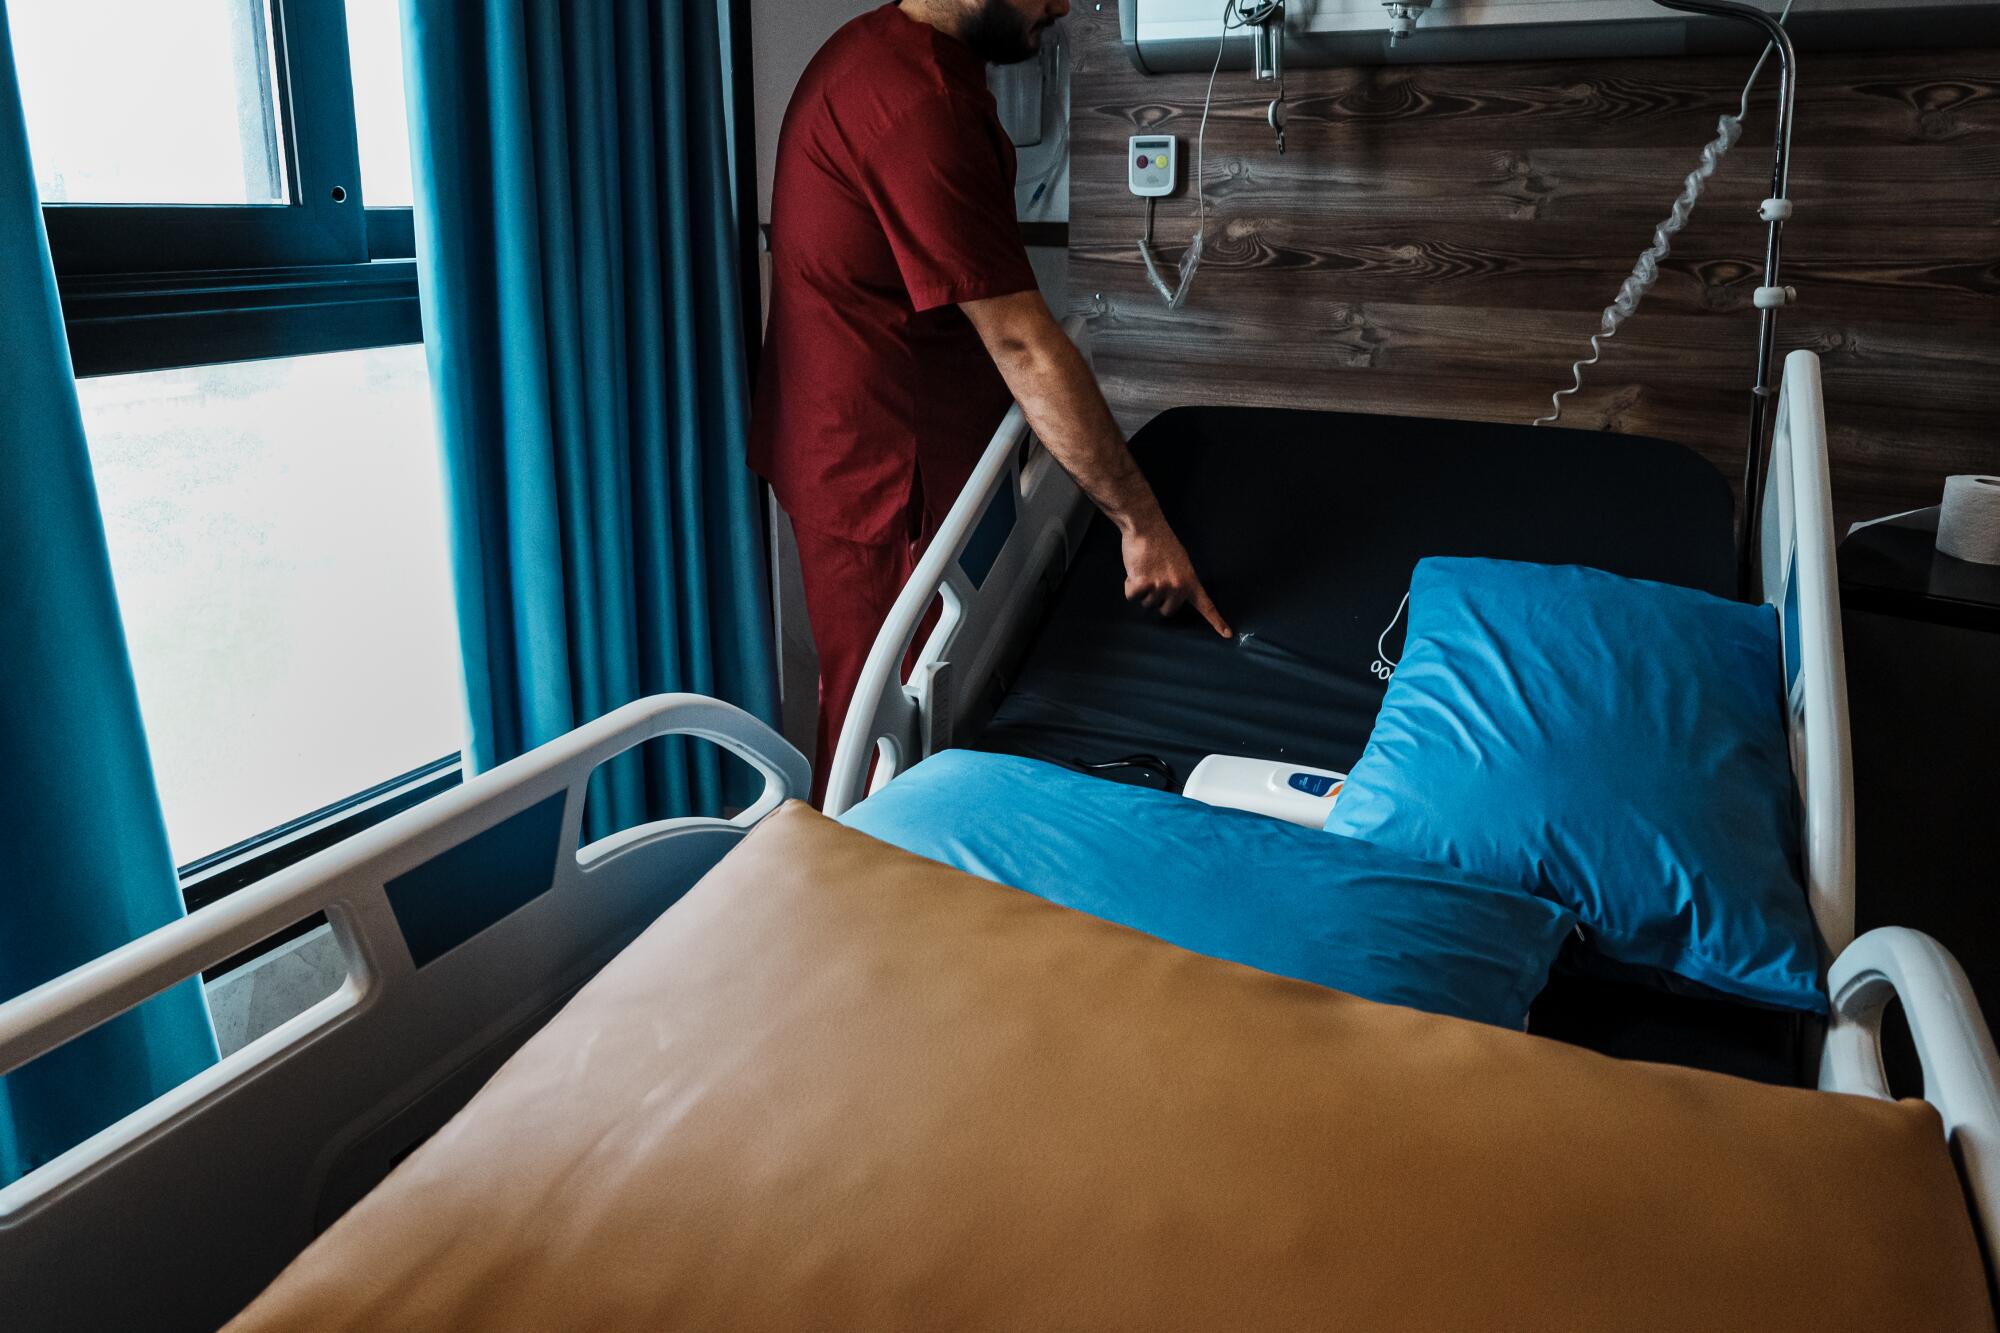 A hospital worker in a red uniform points to a hole on a hospital bed with blue pillows